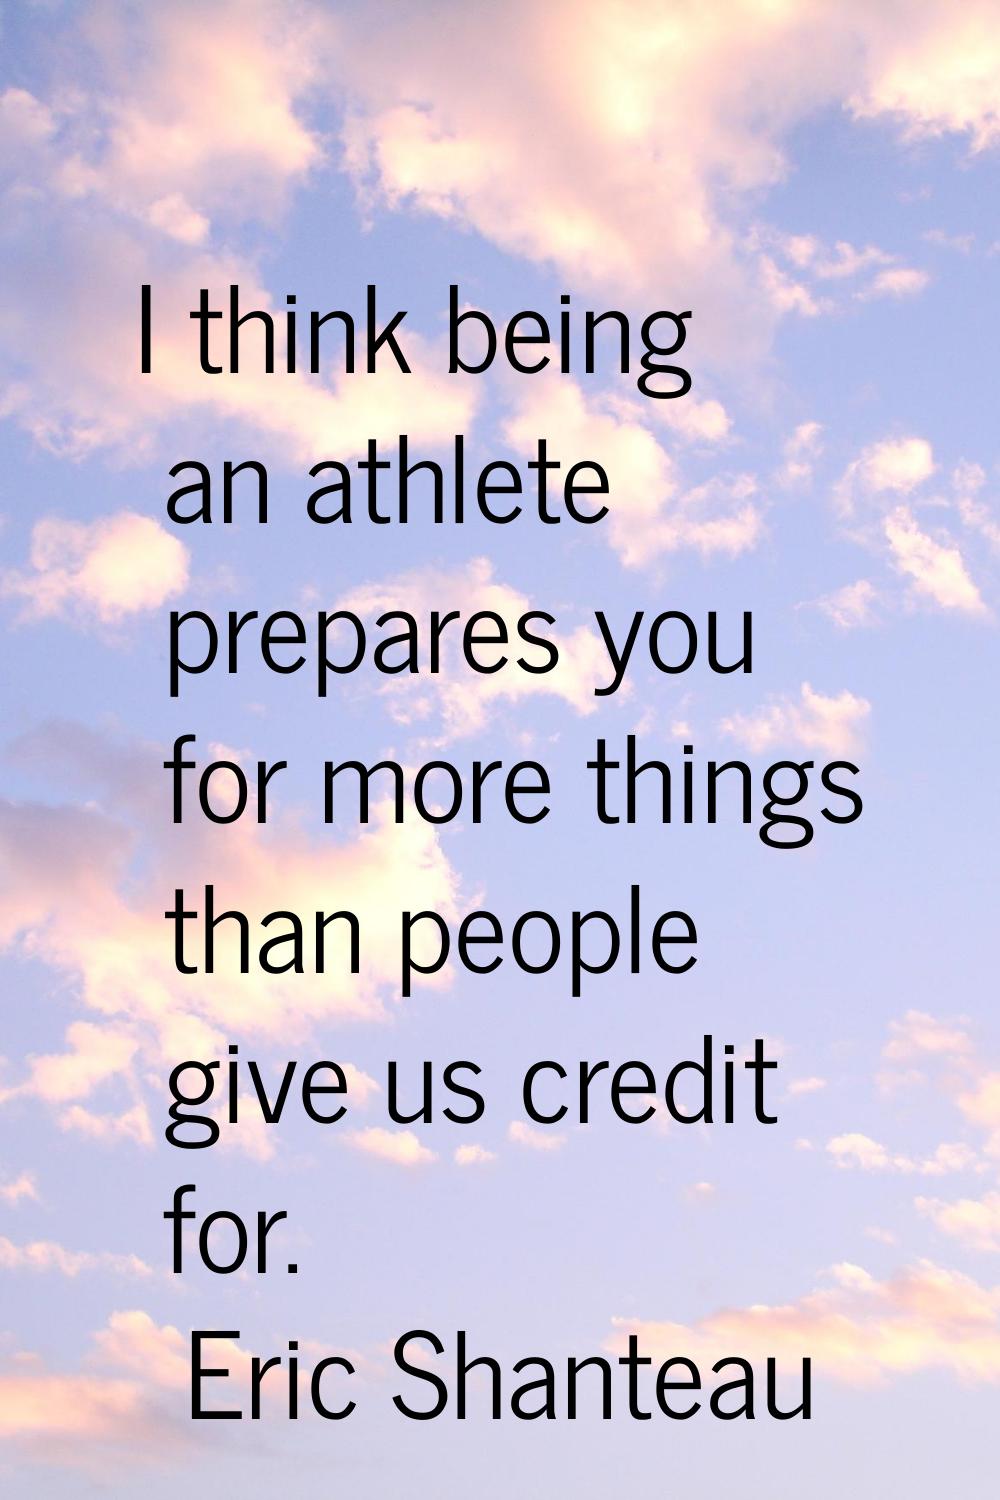 I think being an athlete prepares you for more things than people give us credit for.